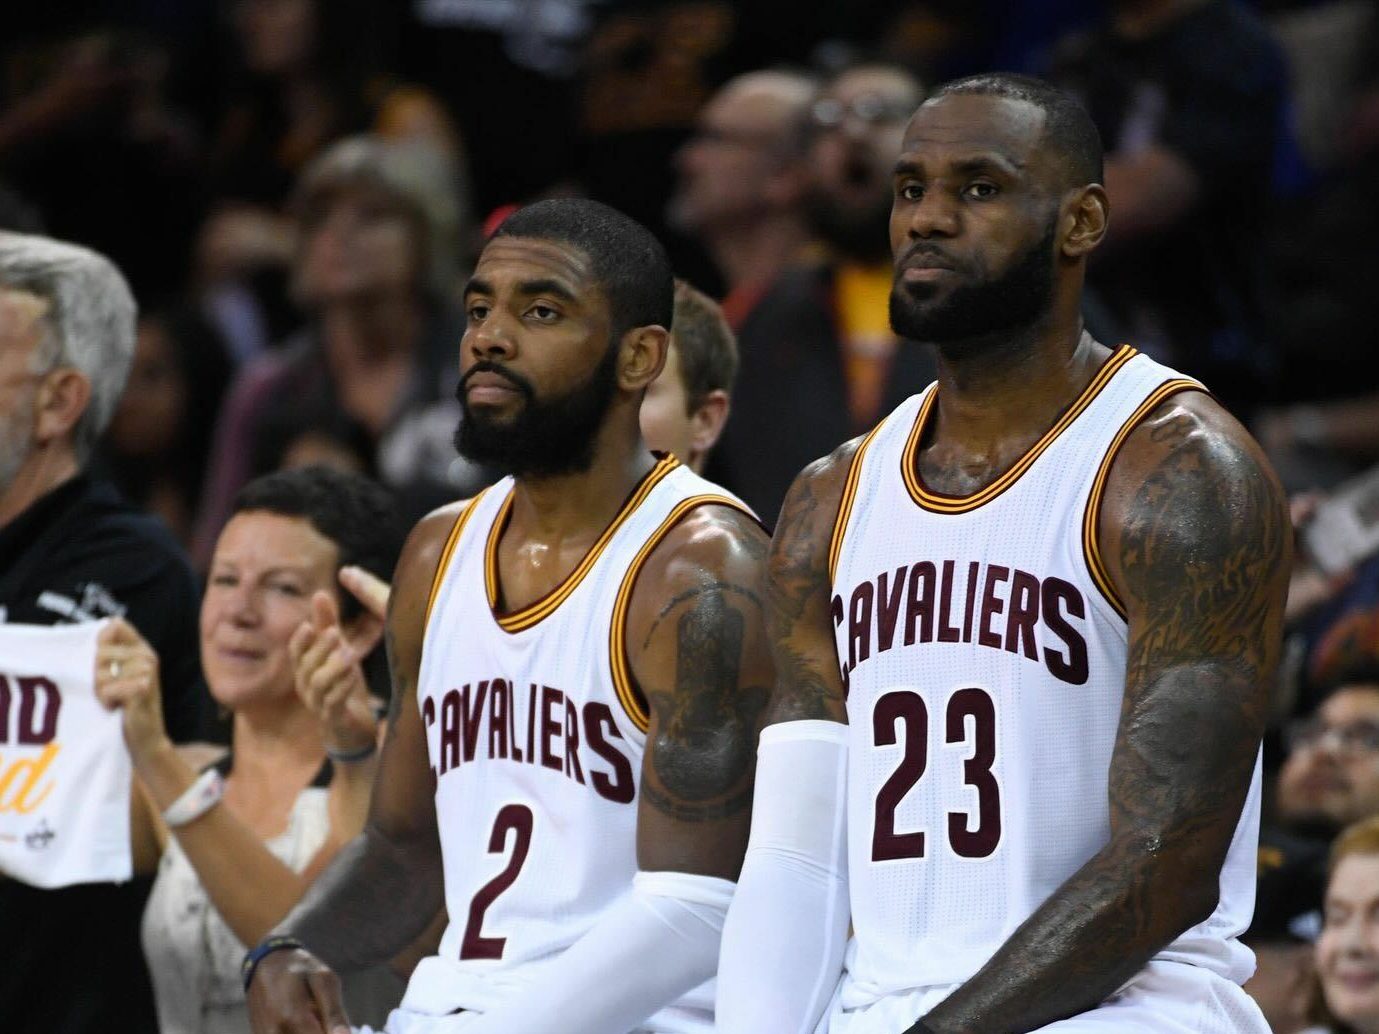 LeBron James and Kyrie Irving look on as the two former teammates could possibly be making a reunion in Los Angeles